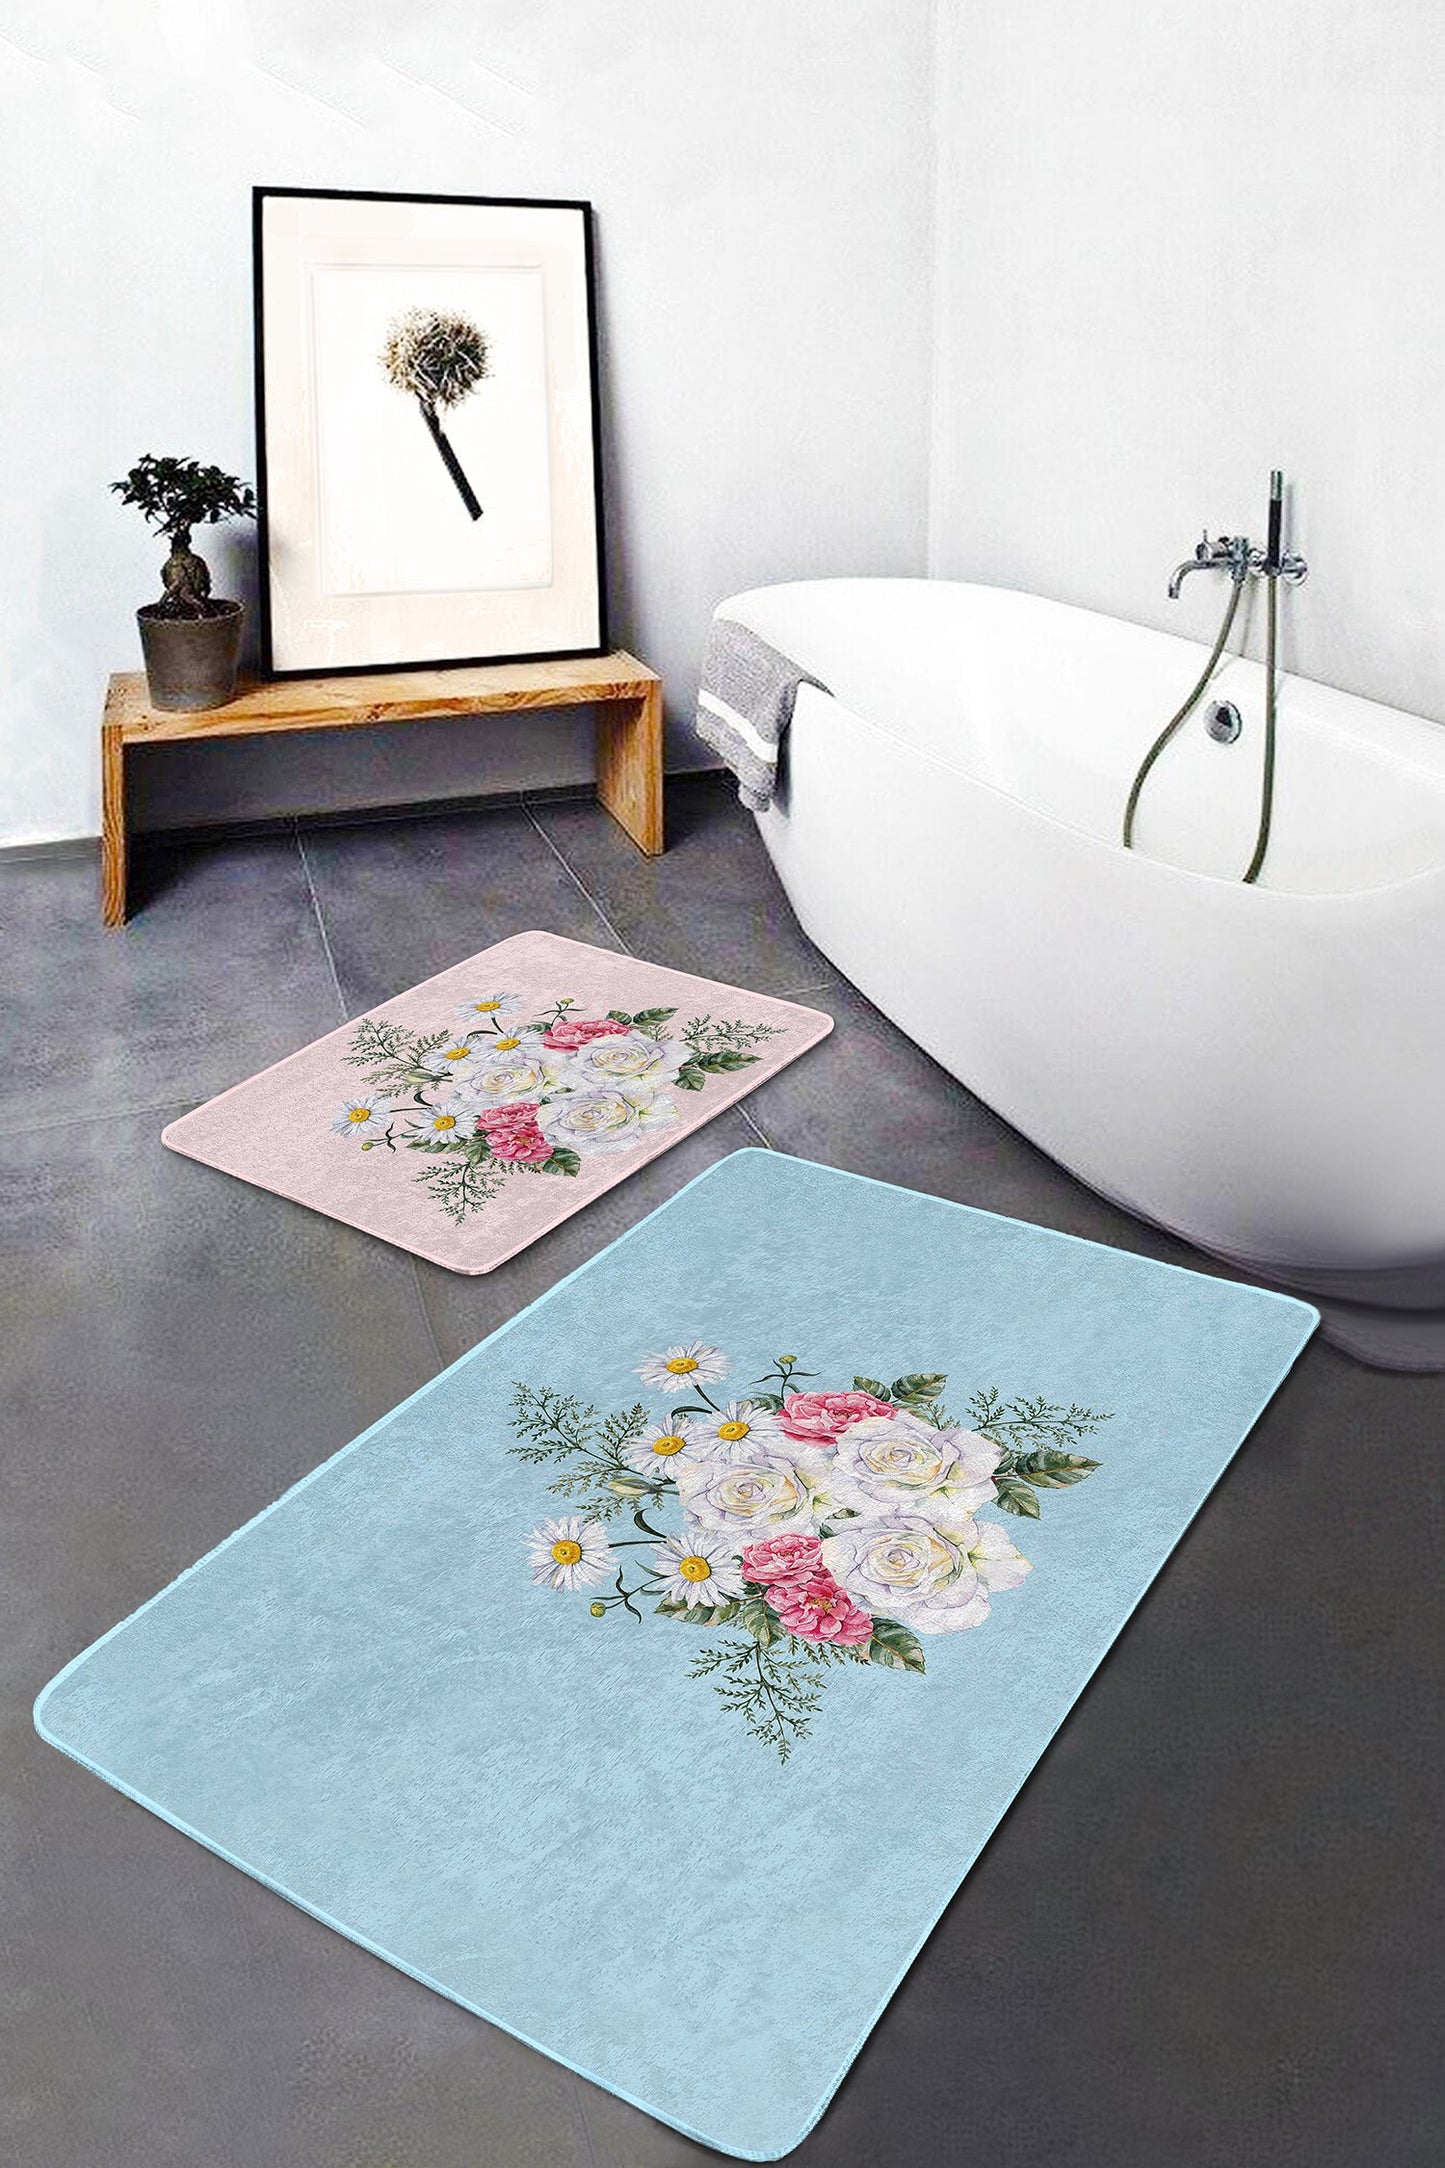 Butterfly on Flowers Bath Mat - Front View